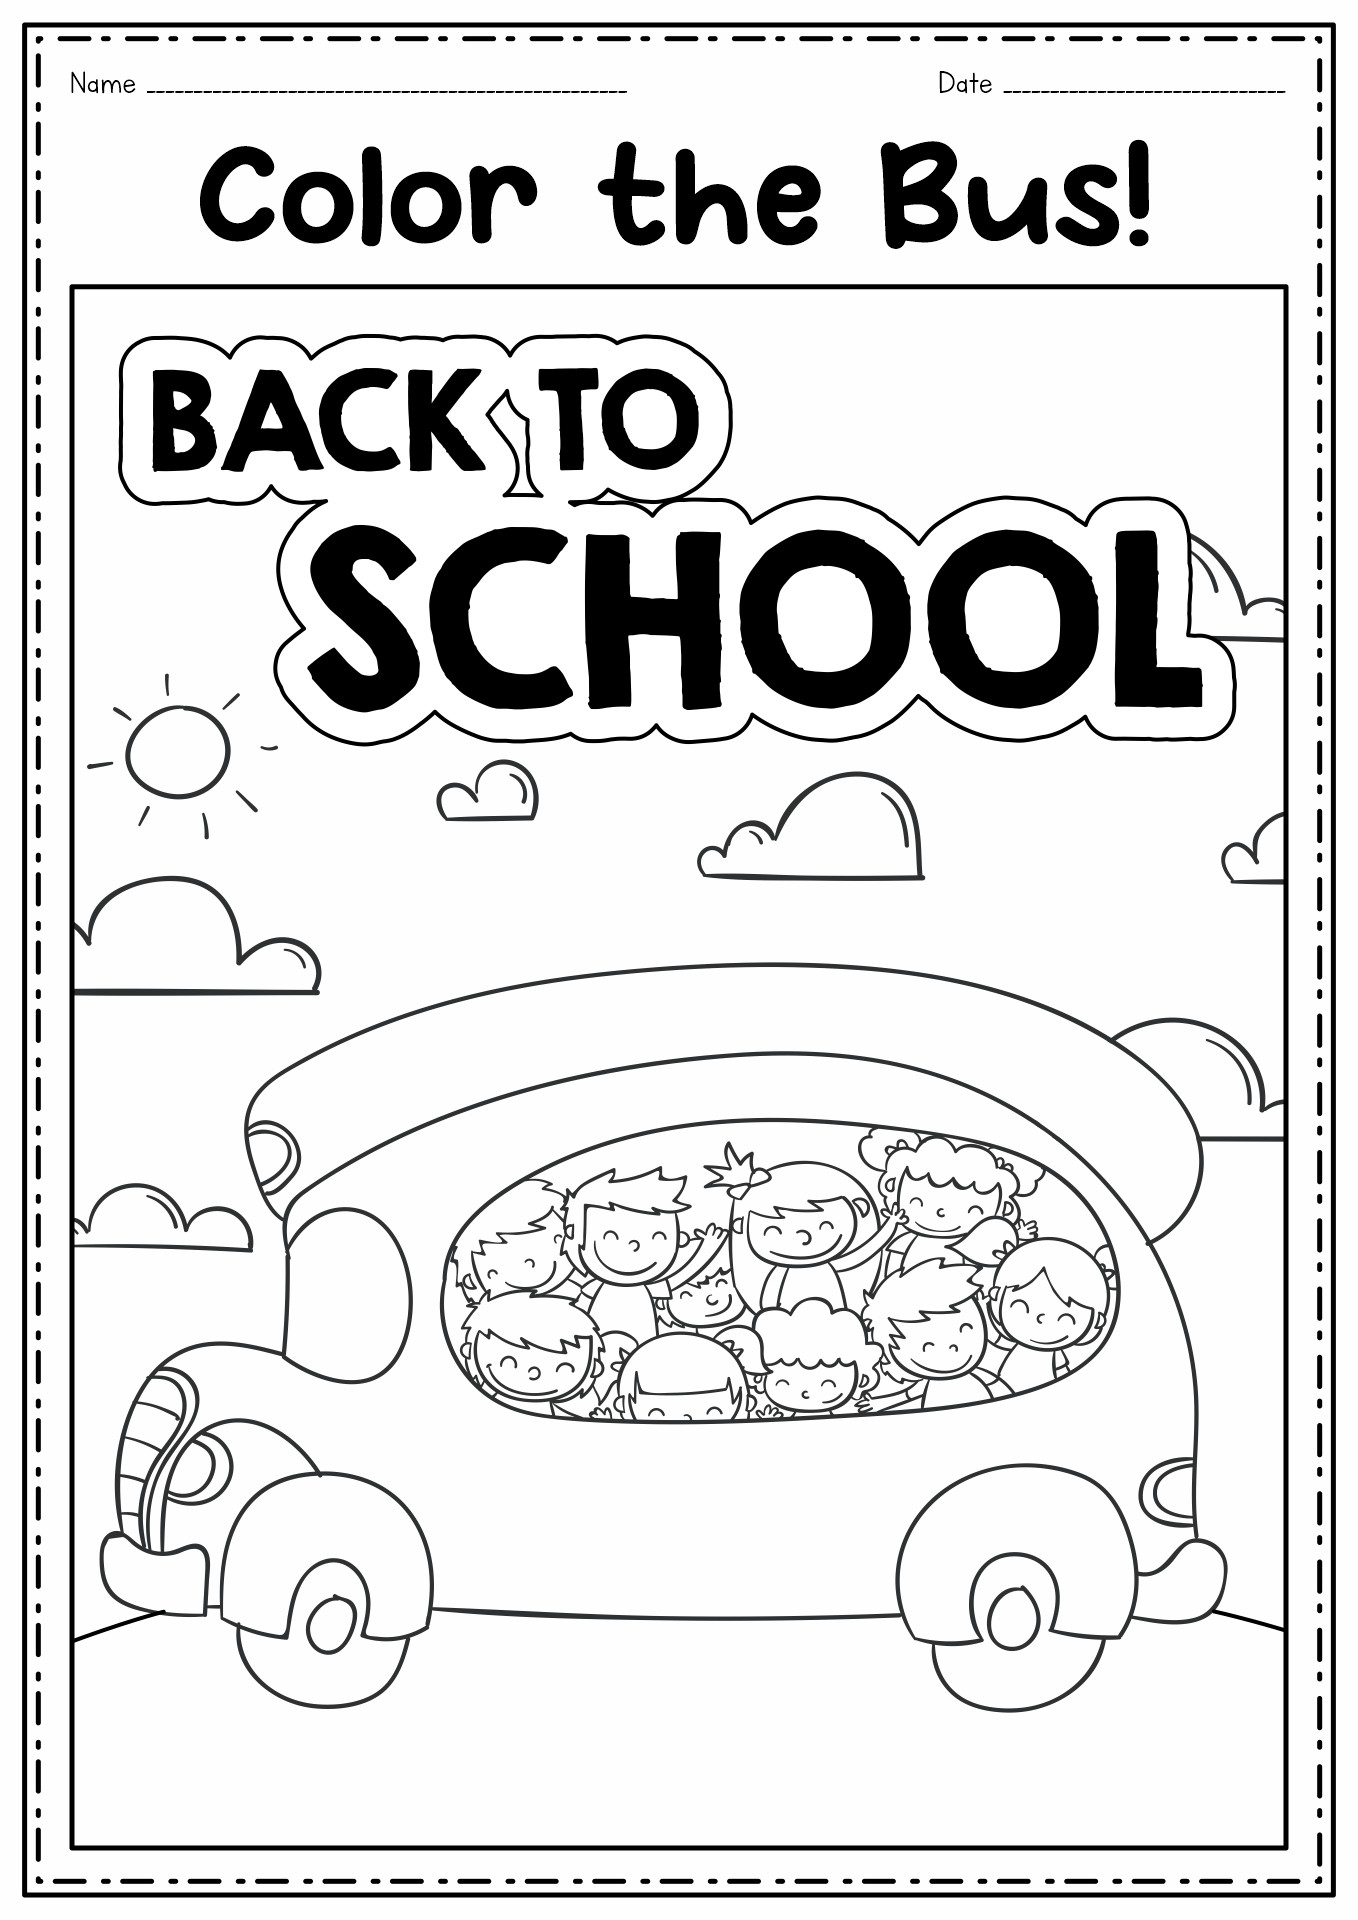 Back to School Coloring Pages Printable